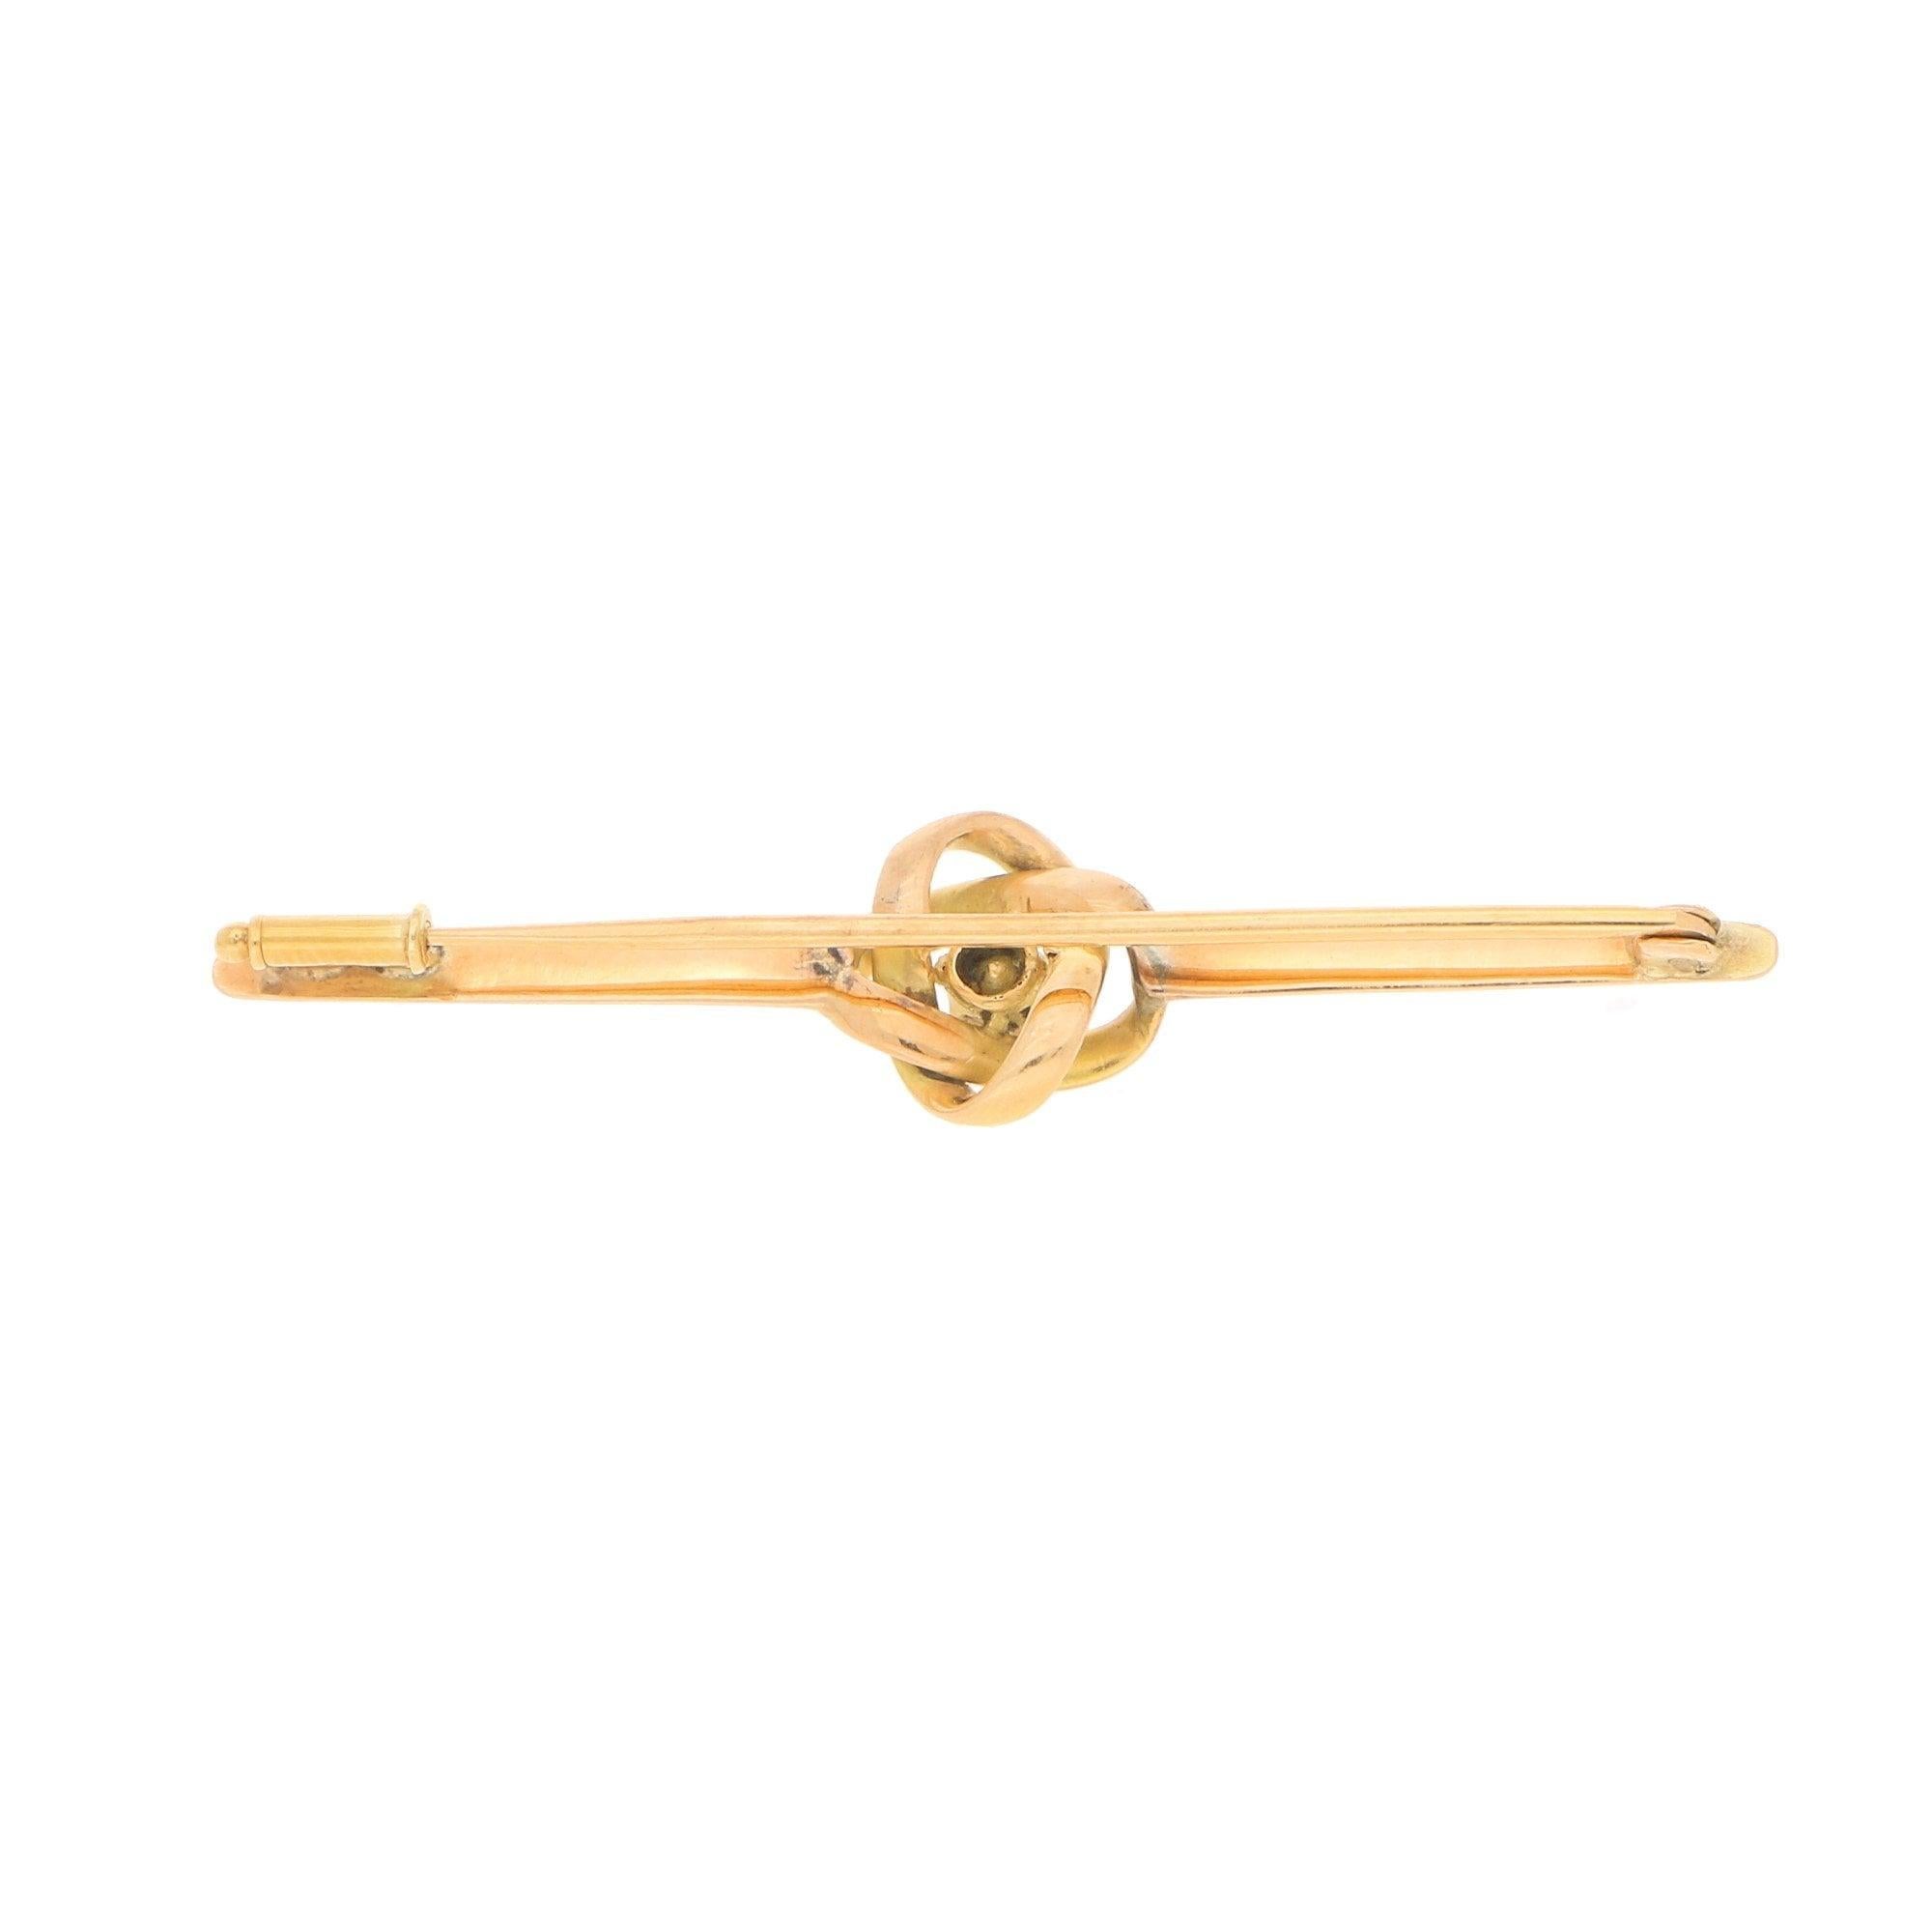 Diamond approximately 0.02 carats.

A simple vintage rose-cut diamond knot bar brooch in rose gold. 
The brooch of the bar design features a central openwork knot motif, set to the centre with a rose-cut diamond in a close-back setting. 
The brooch